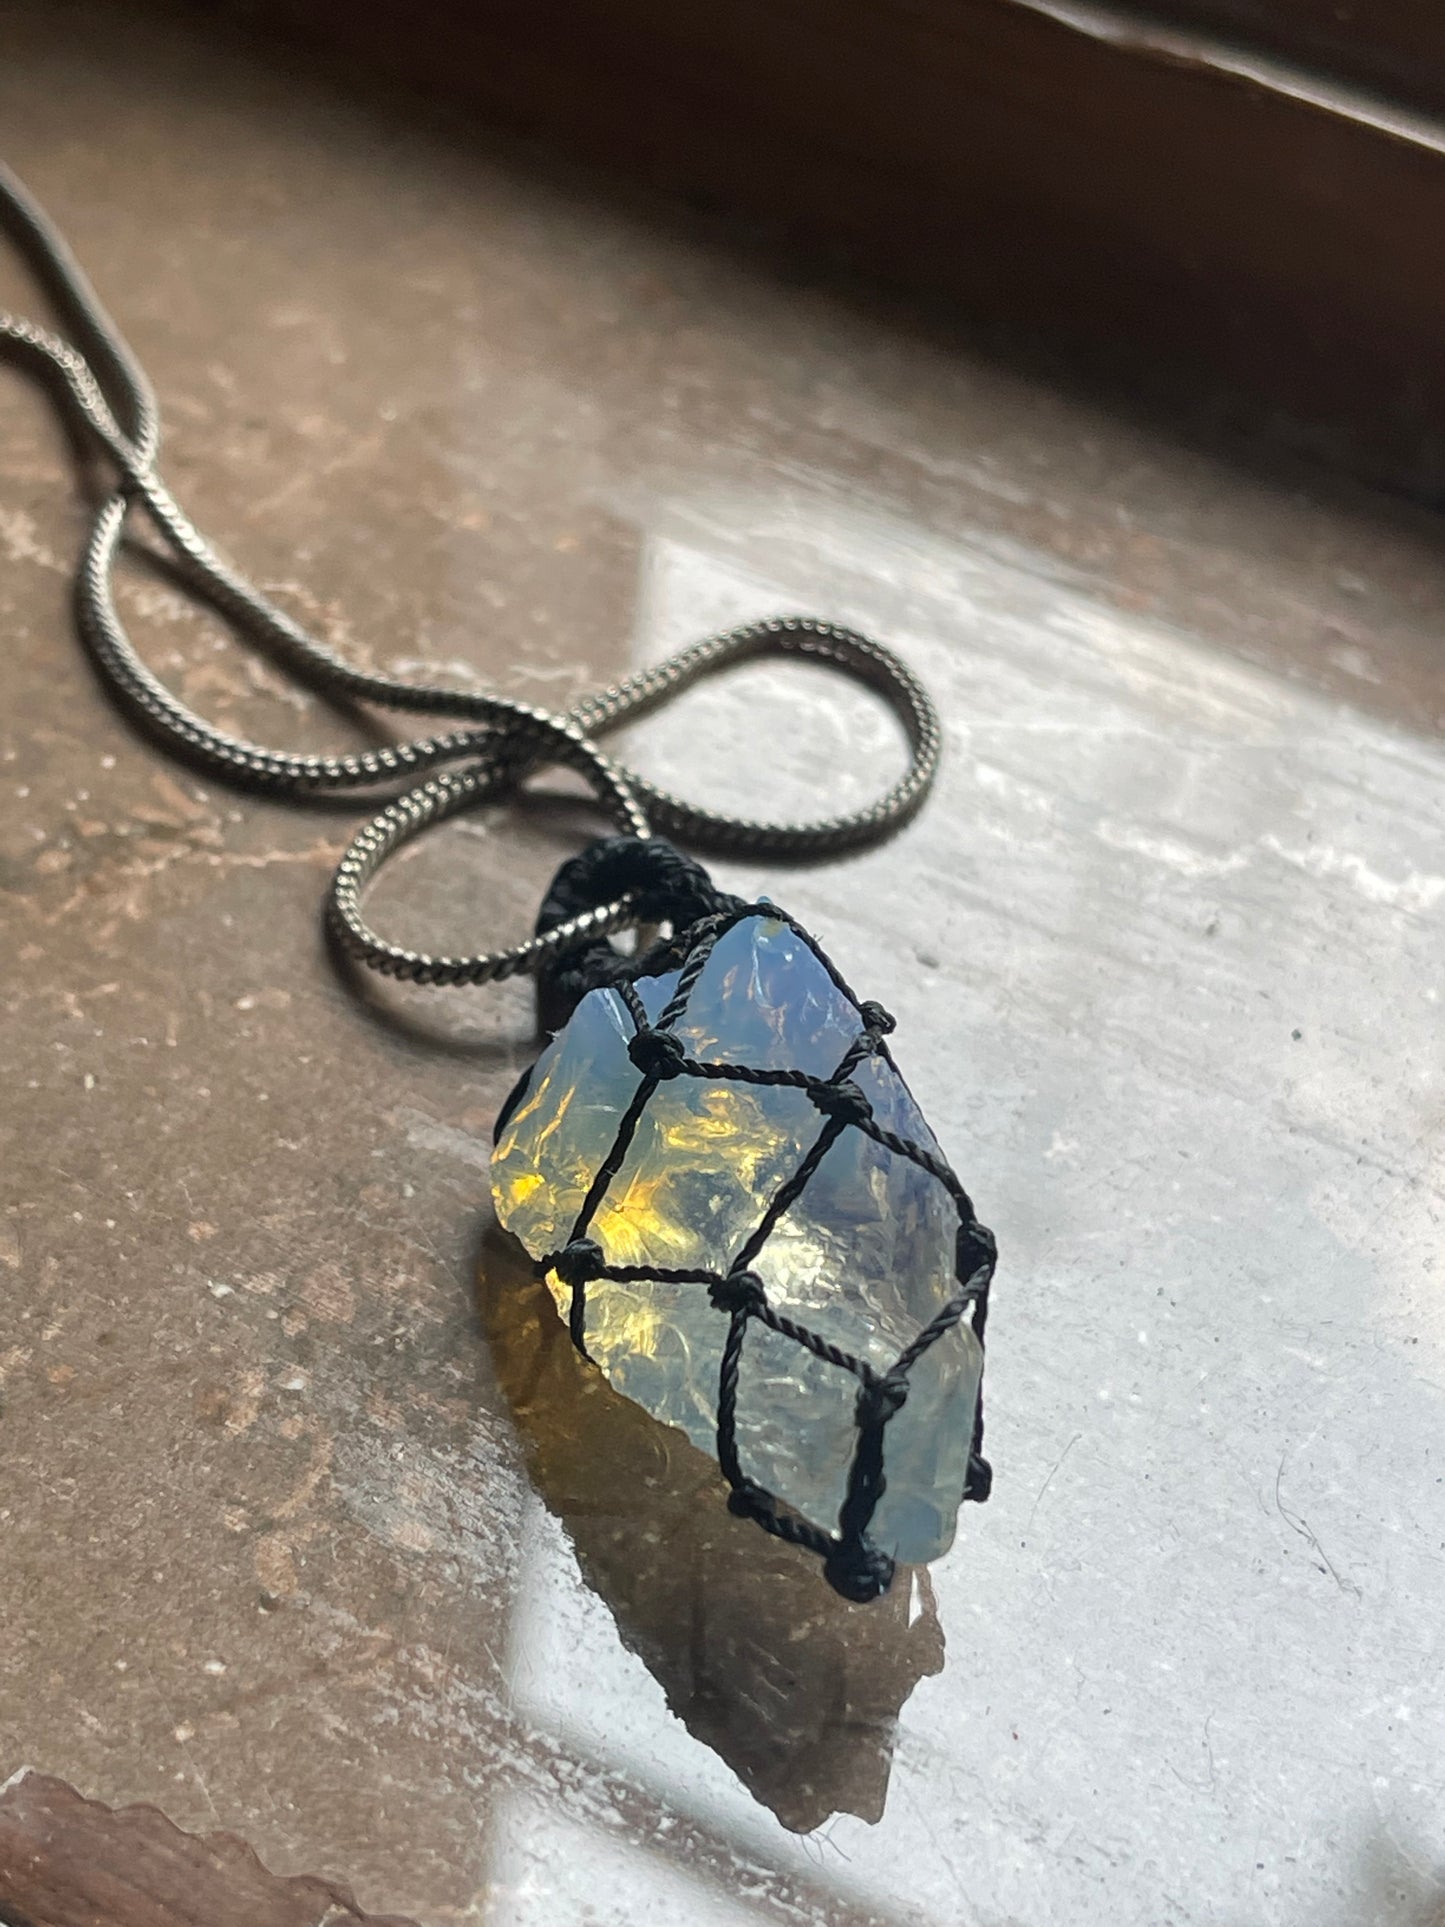 Opalite Mesh Weave Crystal Pendant (Chain not included)